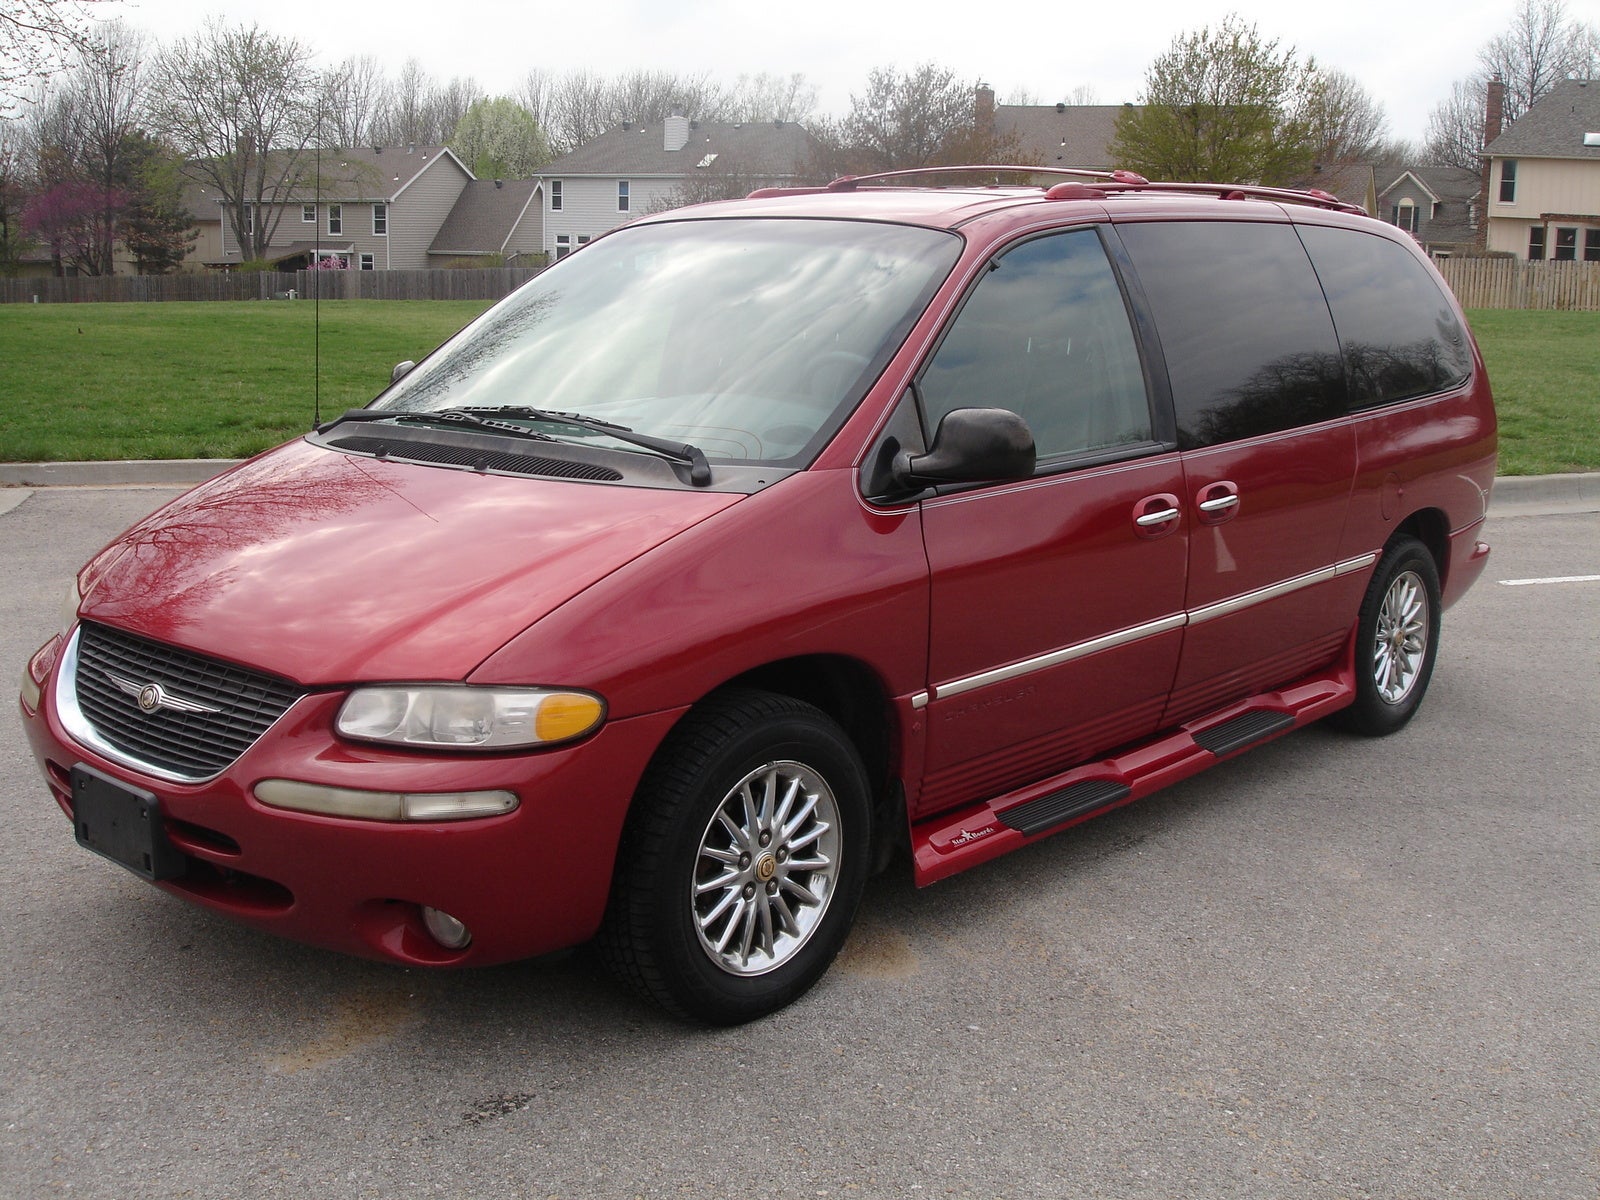 2000 Chrysler Town & Country Exterior Pictures CarGurus